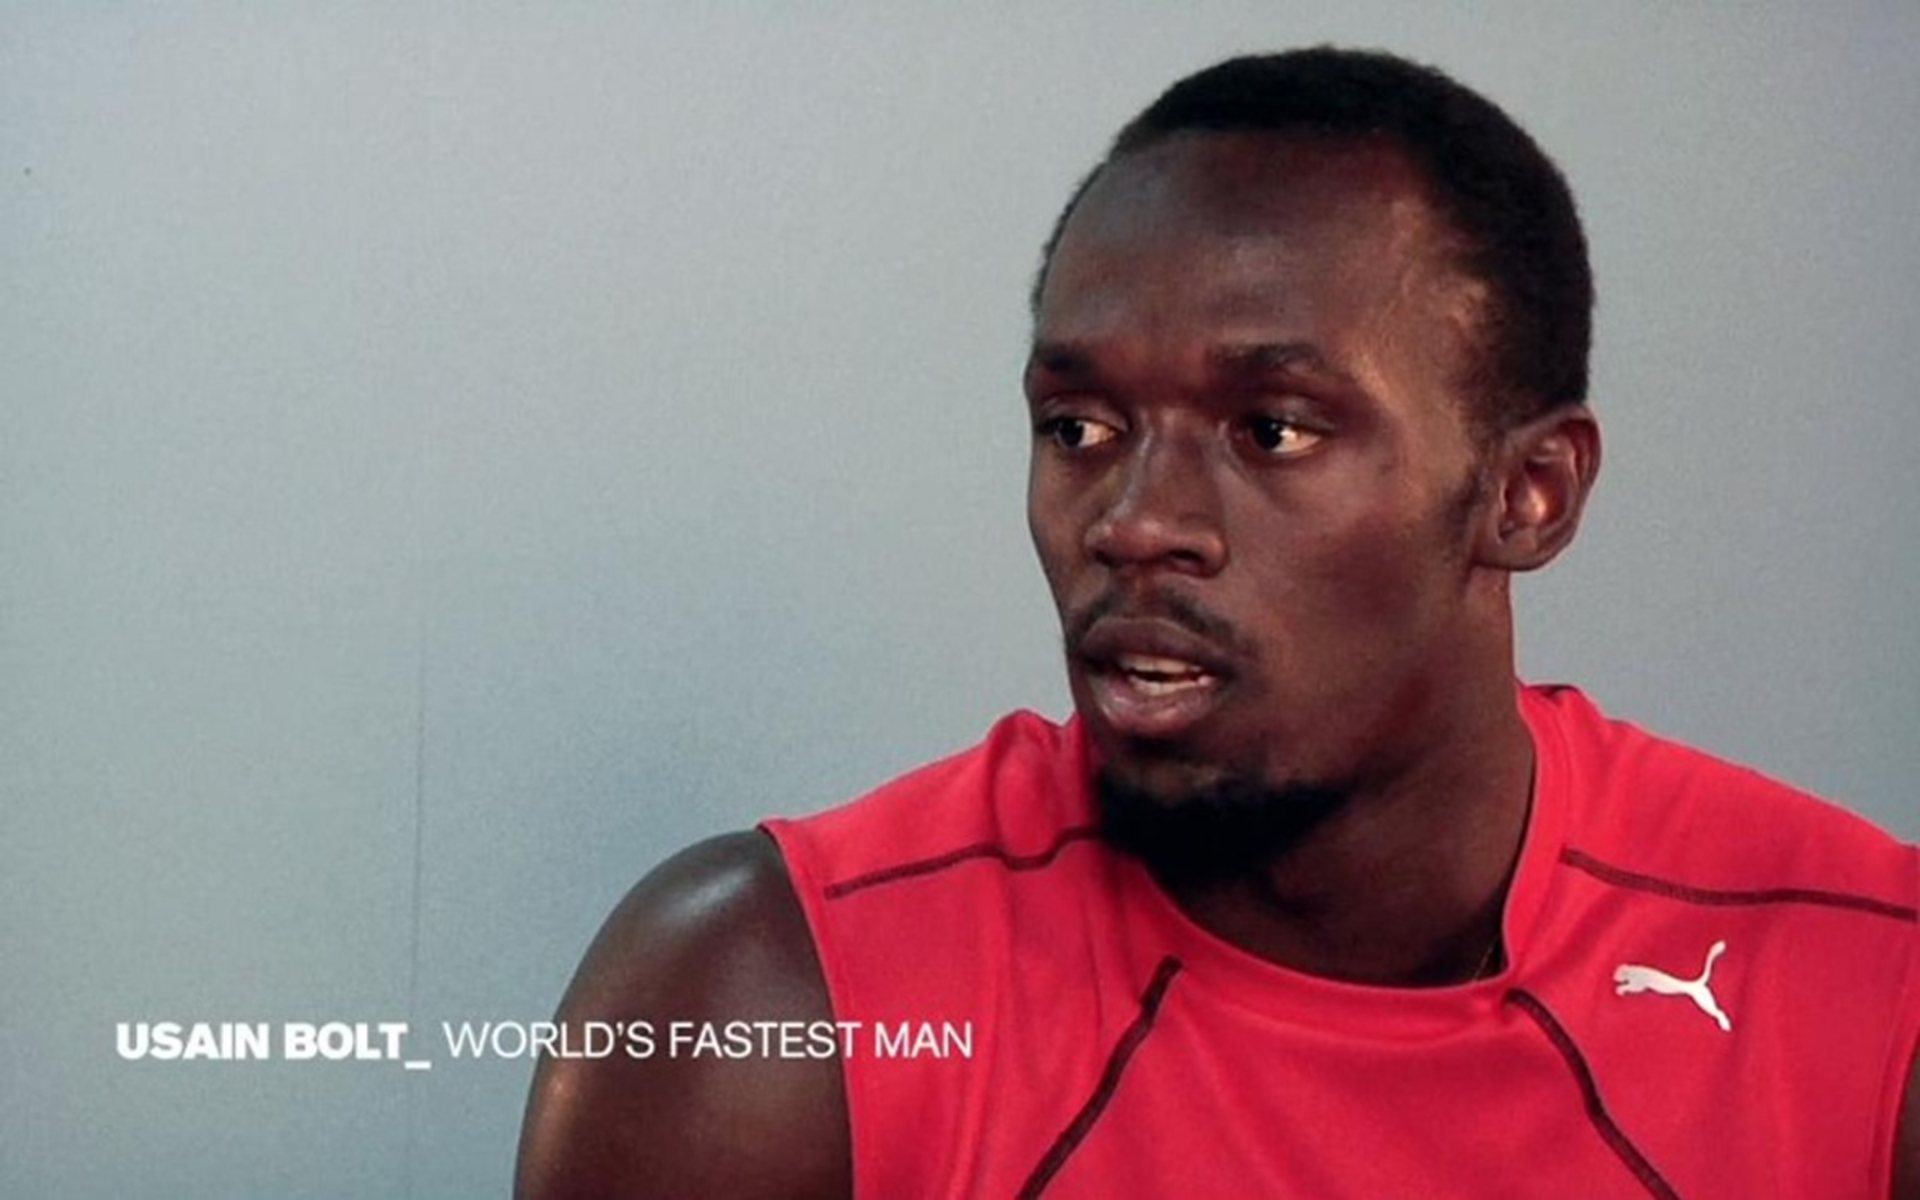 NISSAN GT-R AND MULTI WORLD RECORD HOLDER USAIN BOLT HEADLINE NEW NISSAN GLOBAL BRAND CAMPAIGN